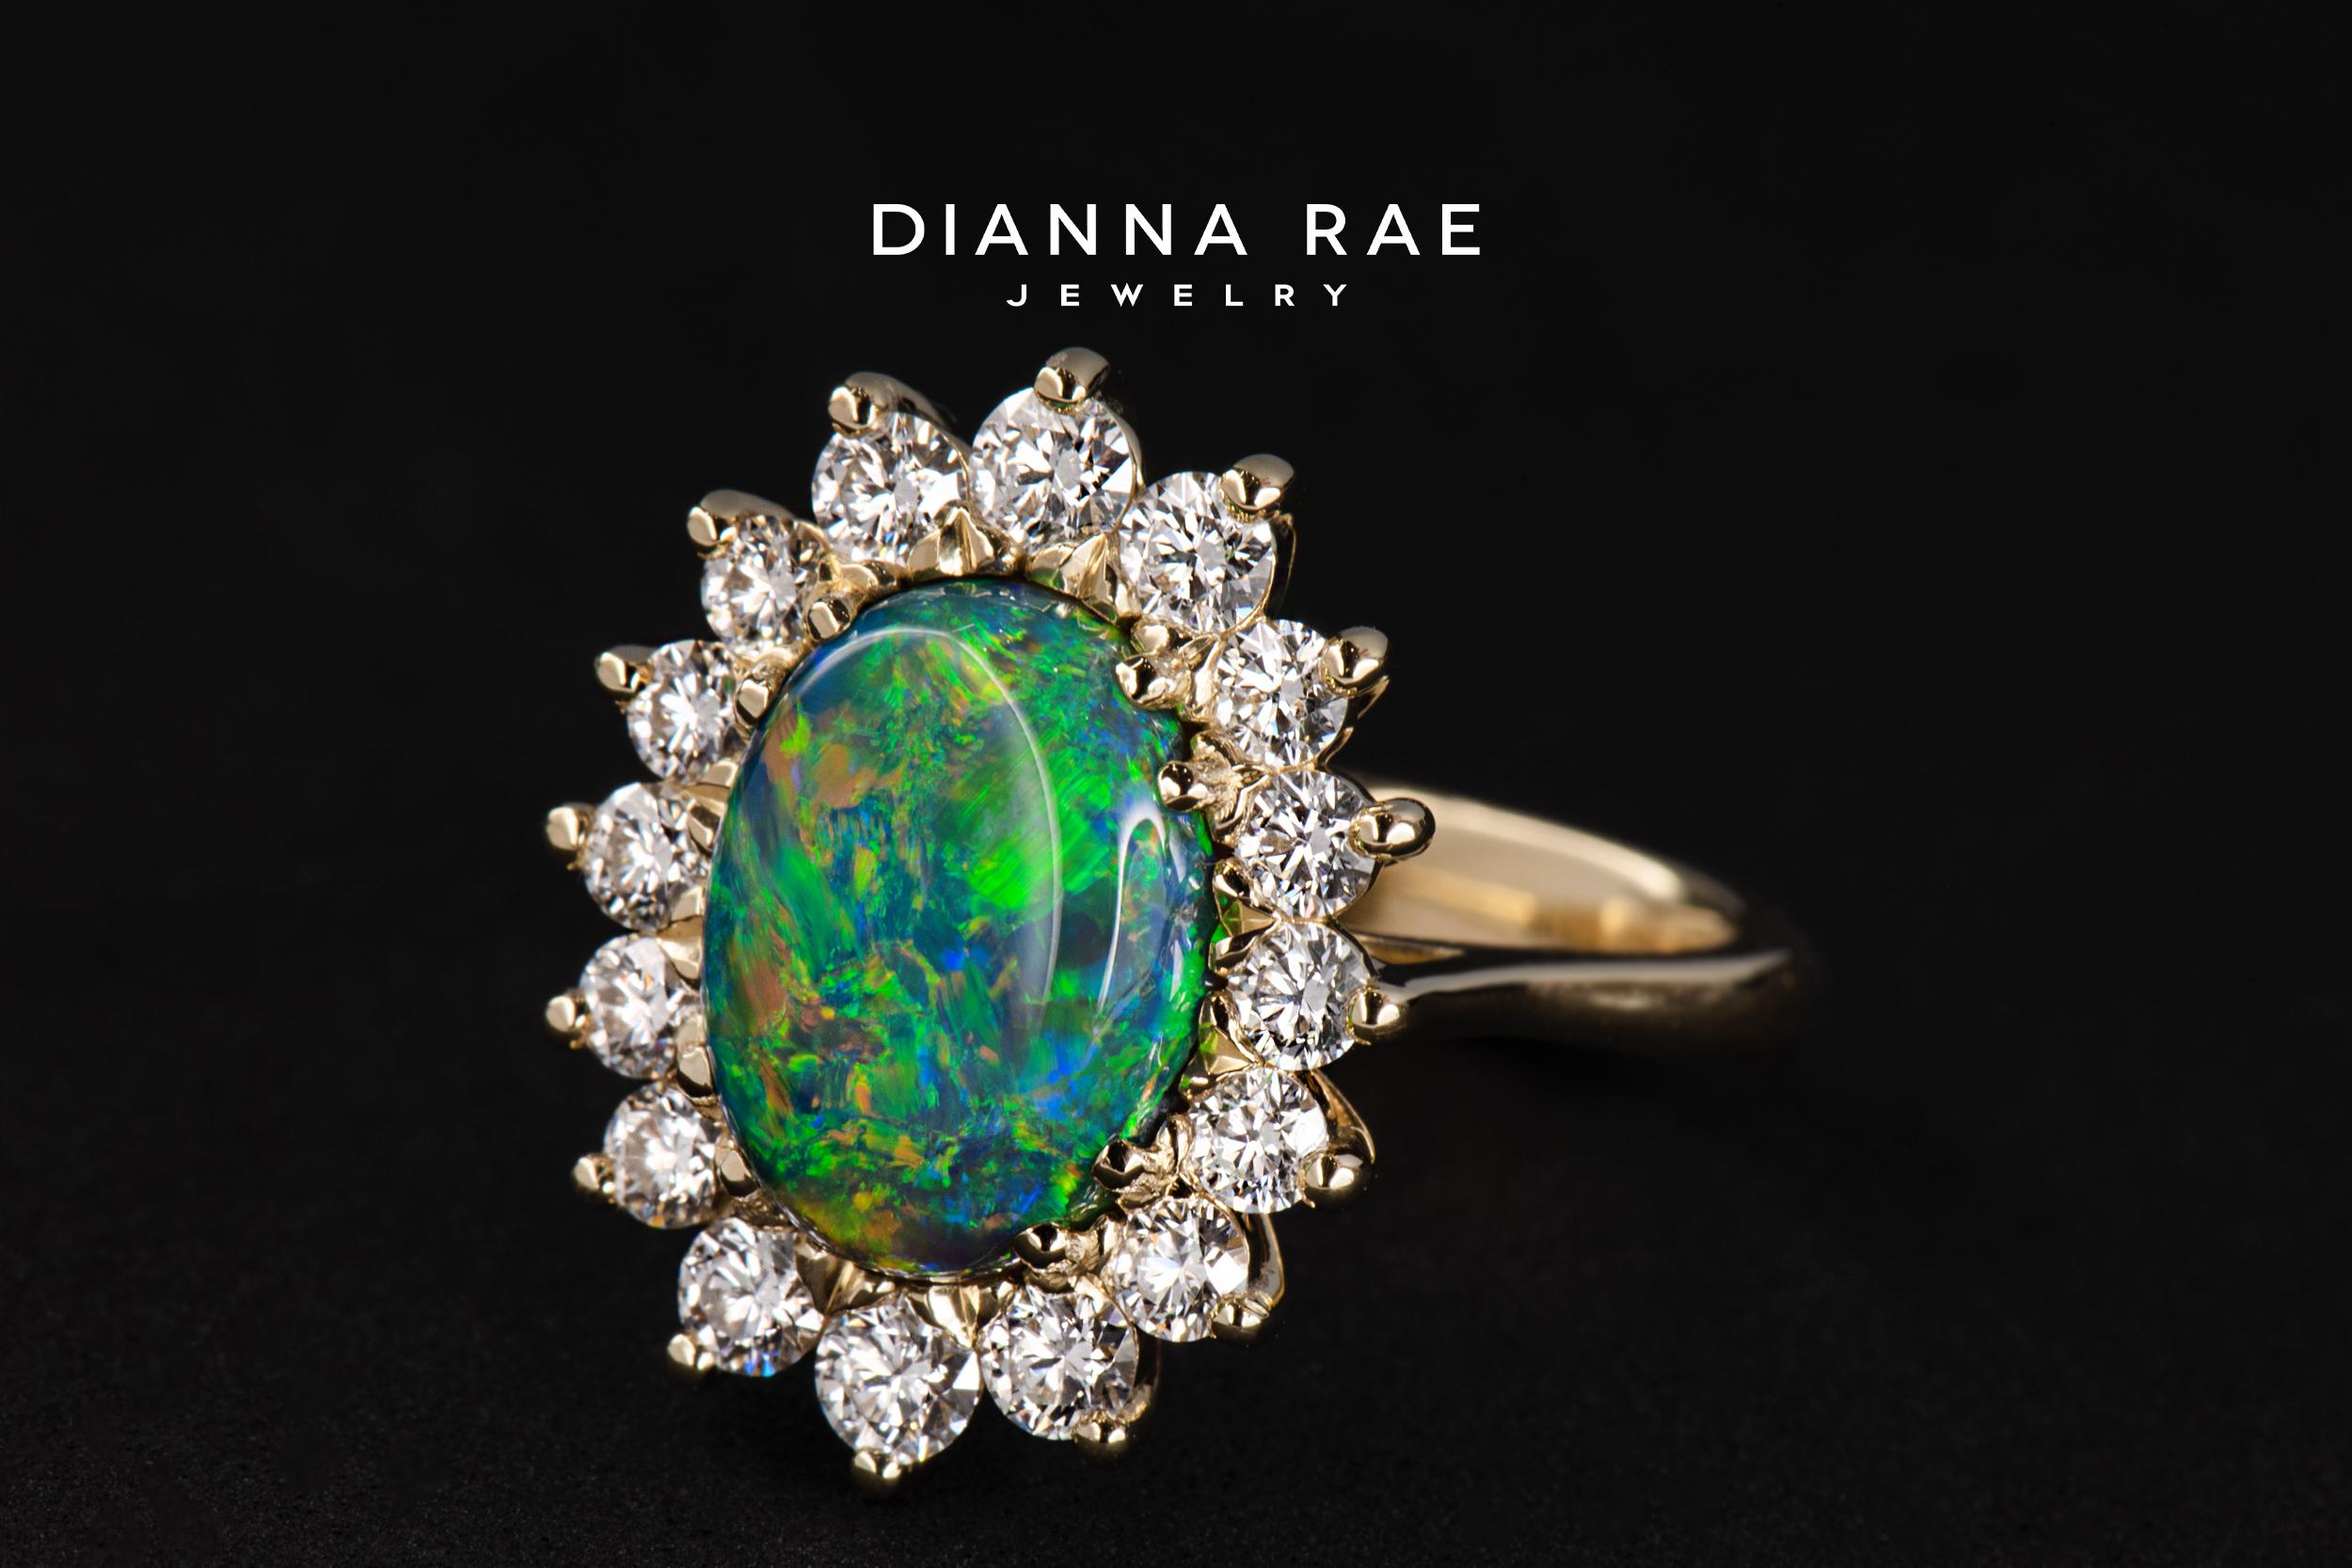 See the northern lights with your own eyes in this Dianna Rae Original, Aurora! Crafted in 18k yellow gold, this ring features a mesmerizing 3.69ct Lightning Ridge black opal in the center and is framed by a cluster of ideal-cut round brilliant